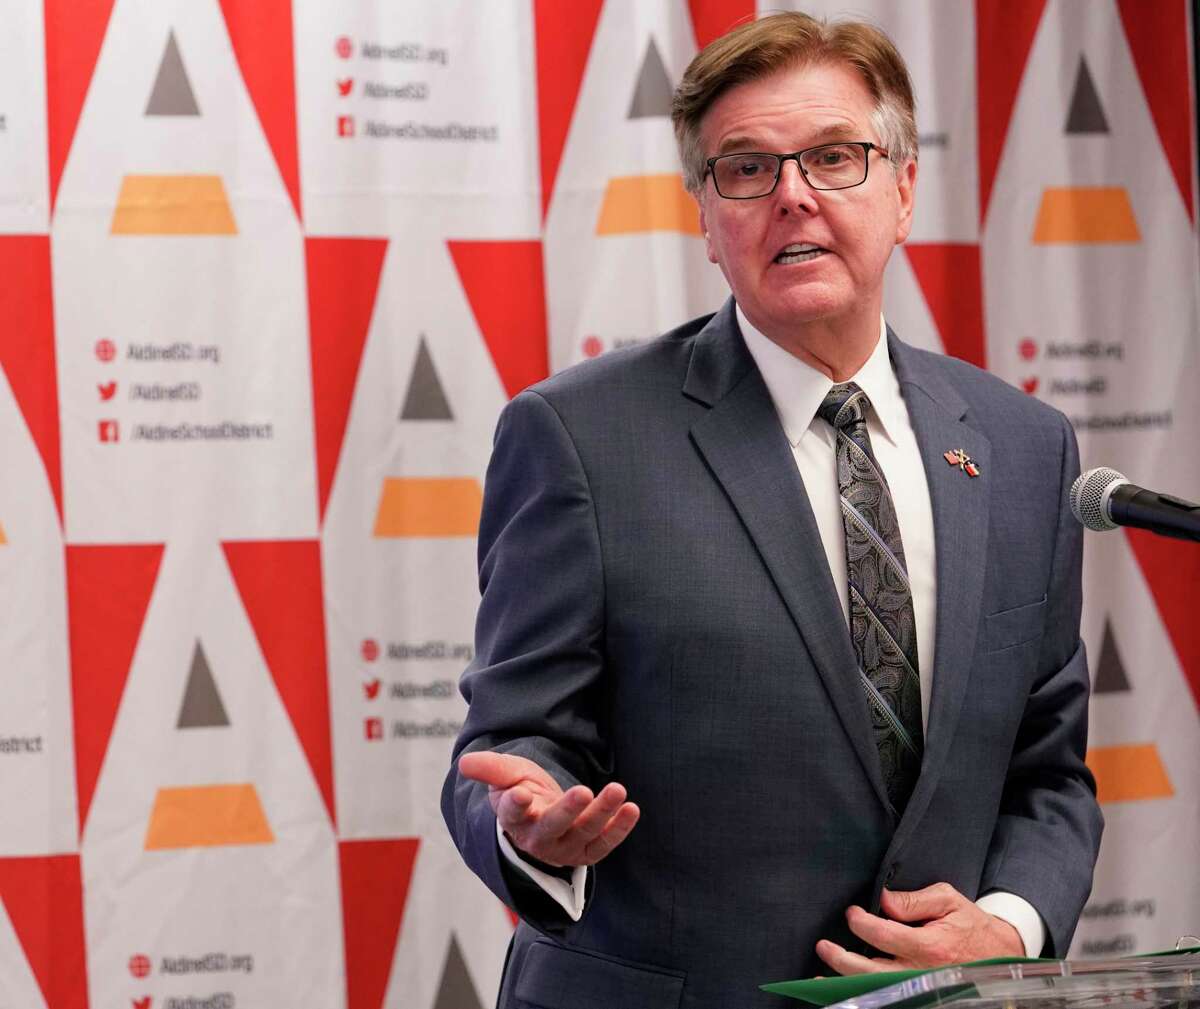 In this August file photo, Texas Lt. Gov. Dan Patrick speaks during a press conference about academic accountability ratings at Stephens Elementary in Aldine ISD. Patrick called the state’s academic accountability system one of the Legislature’s top education accomplishments during his time in office.